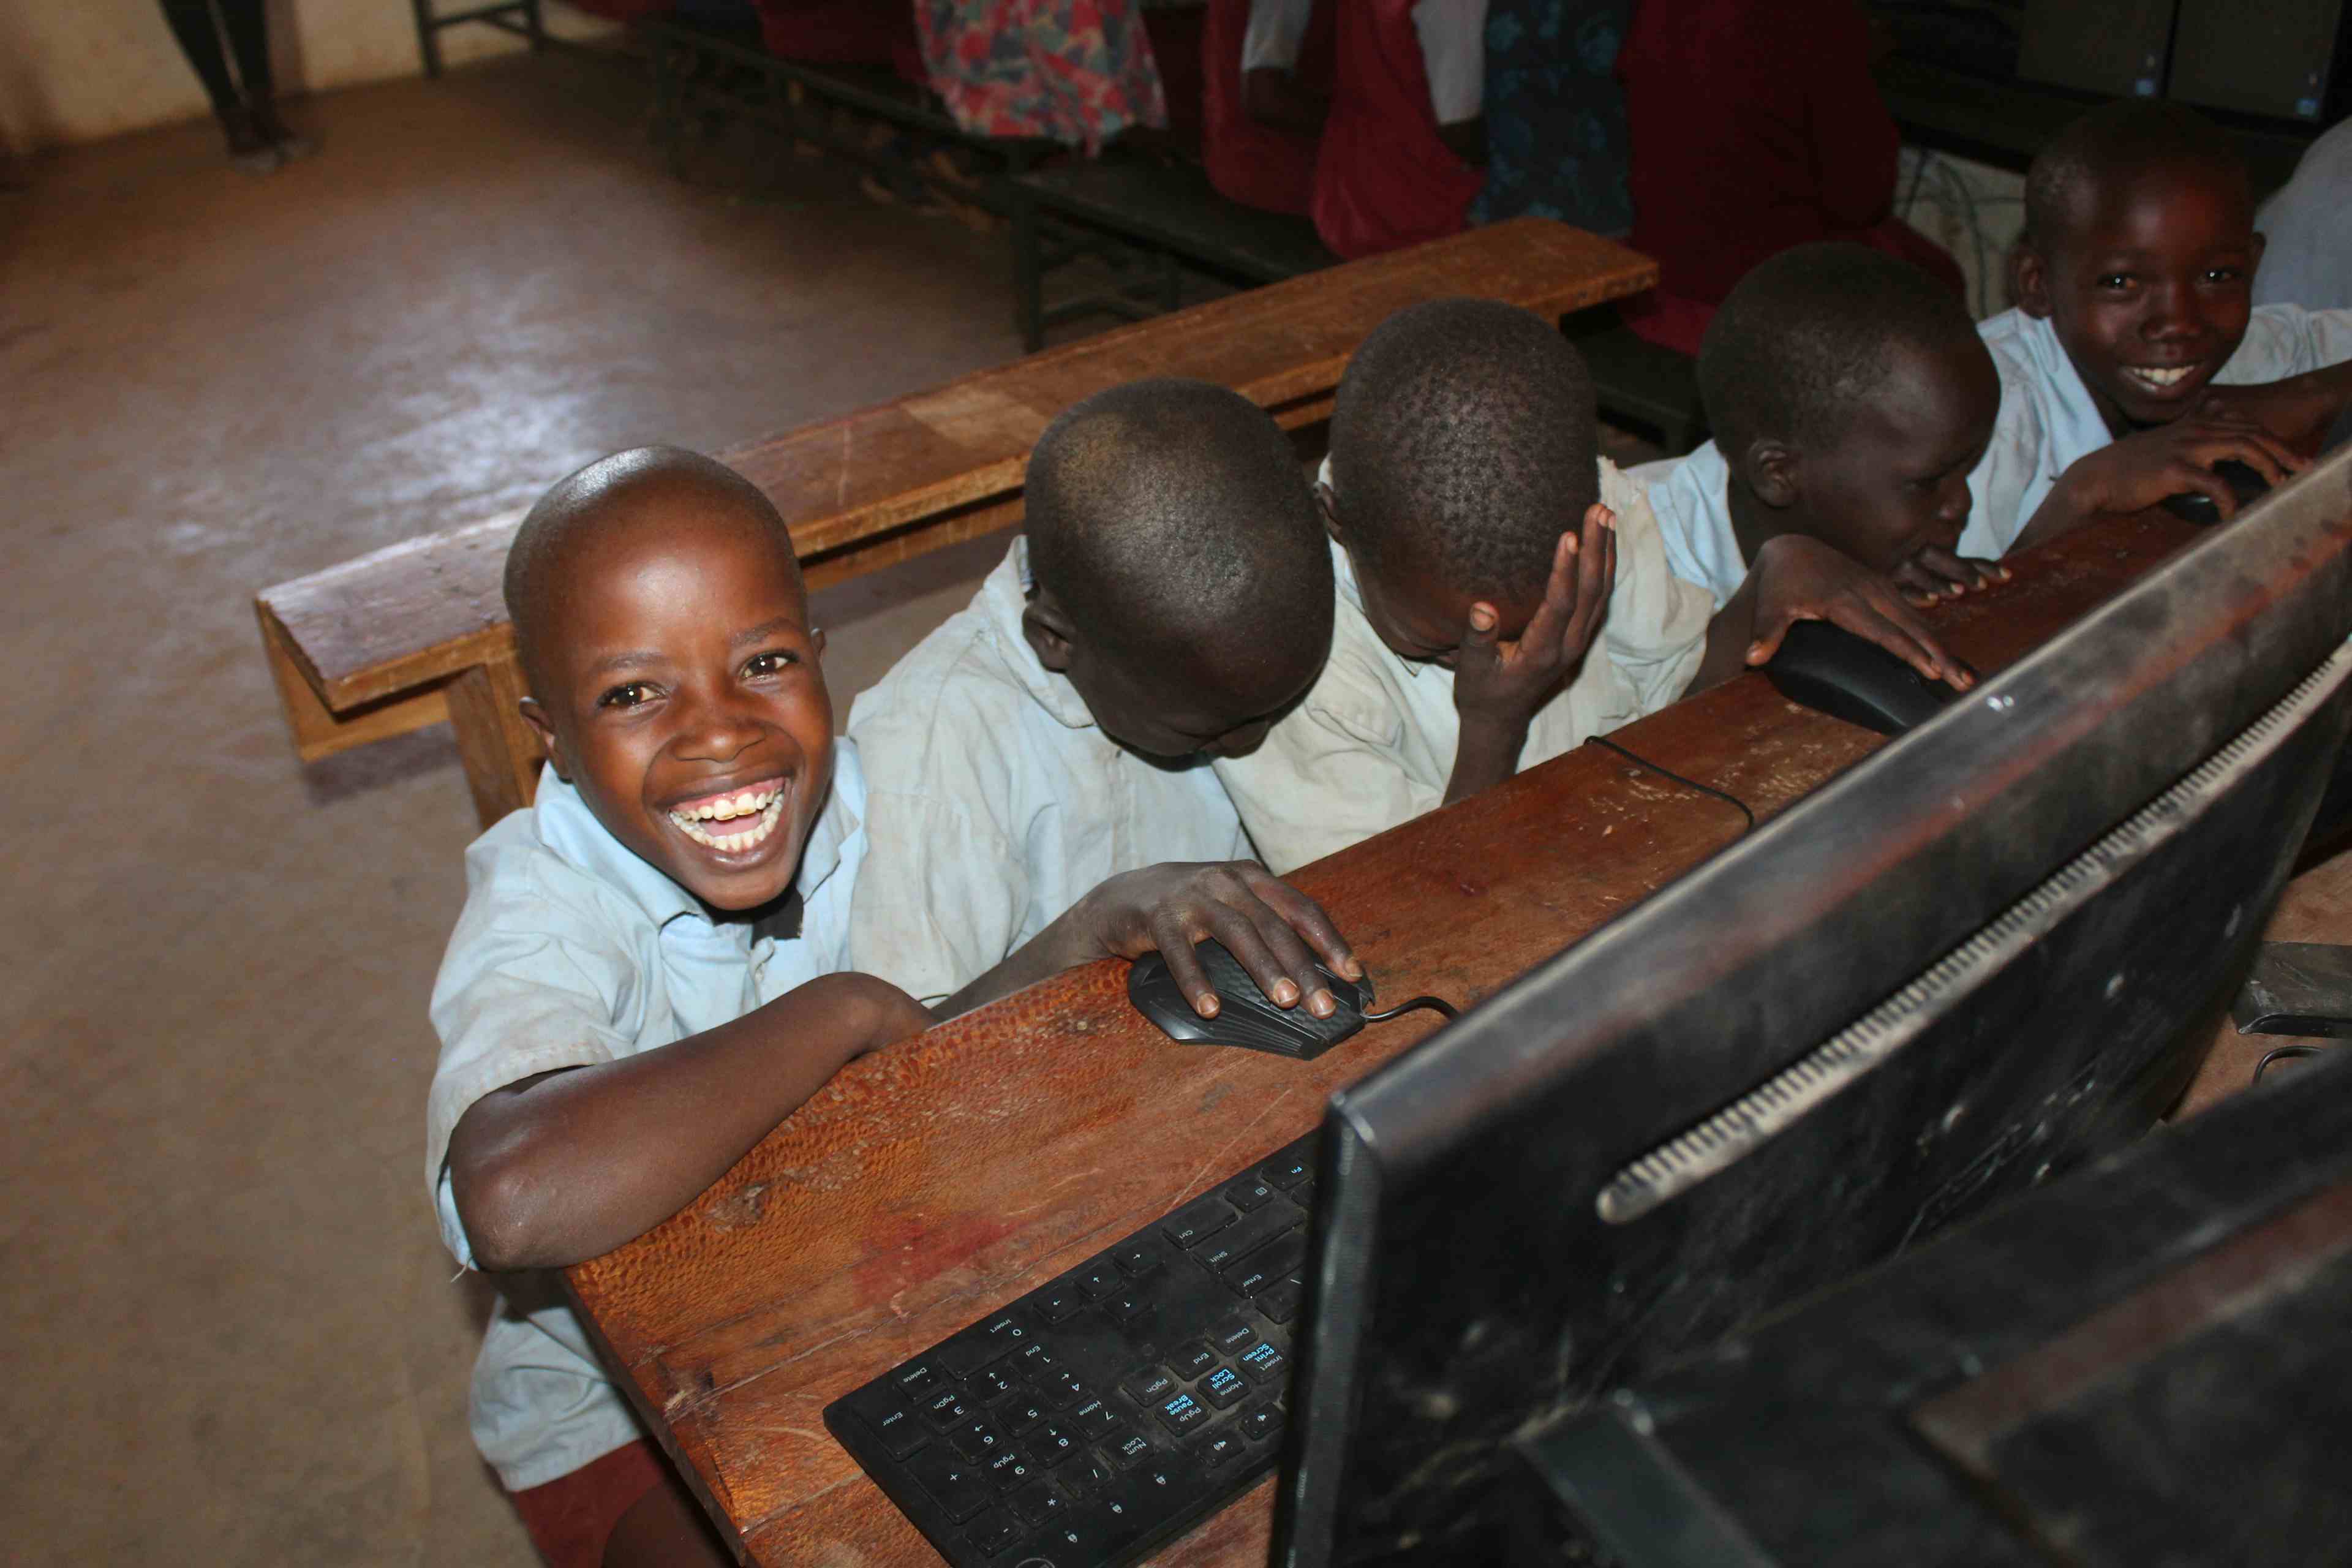 Students smiling with computers in primary school computer classroom